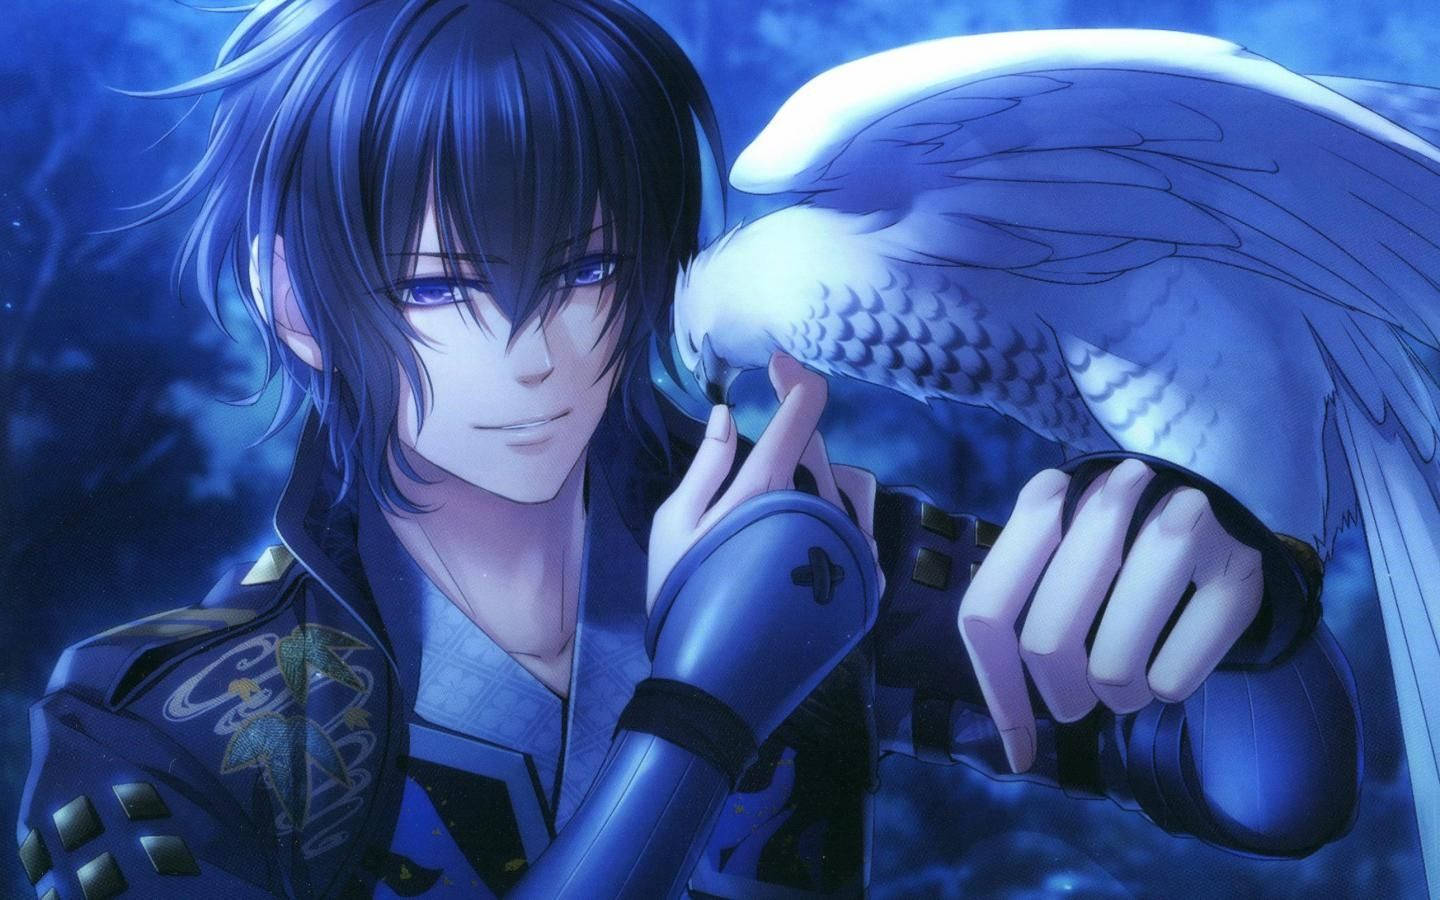 A Handsome Anime Boy Gazing At A Majestic Eagle Wallpaper